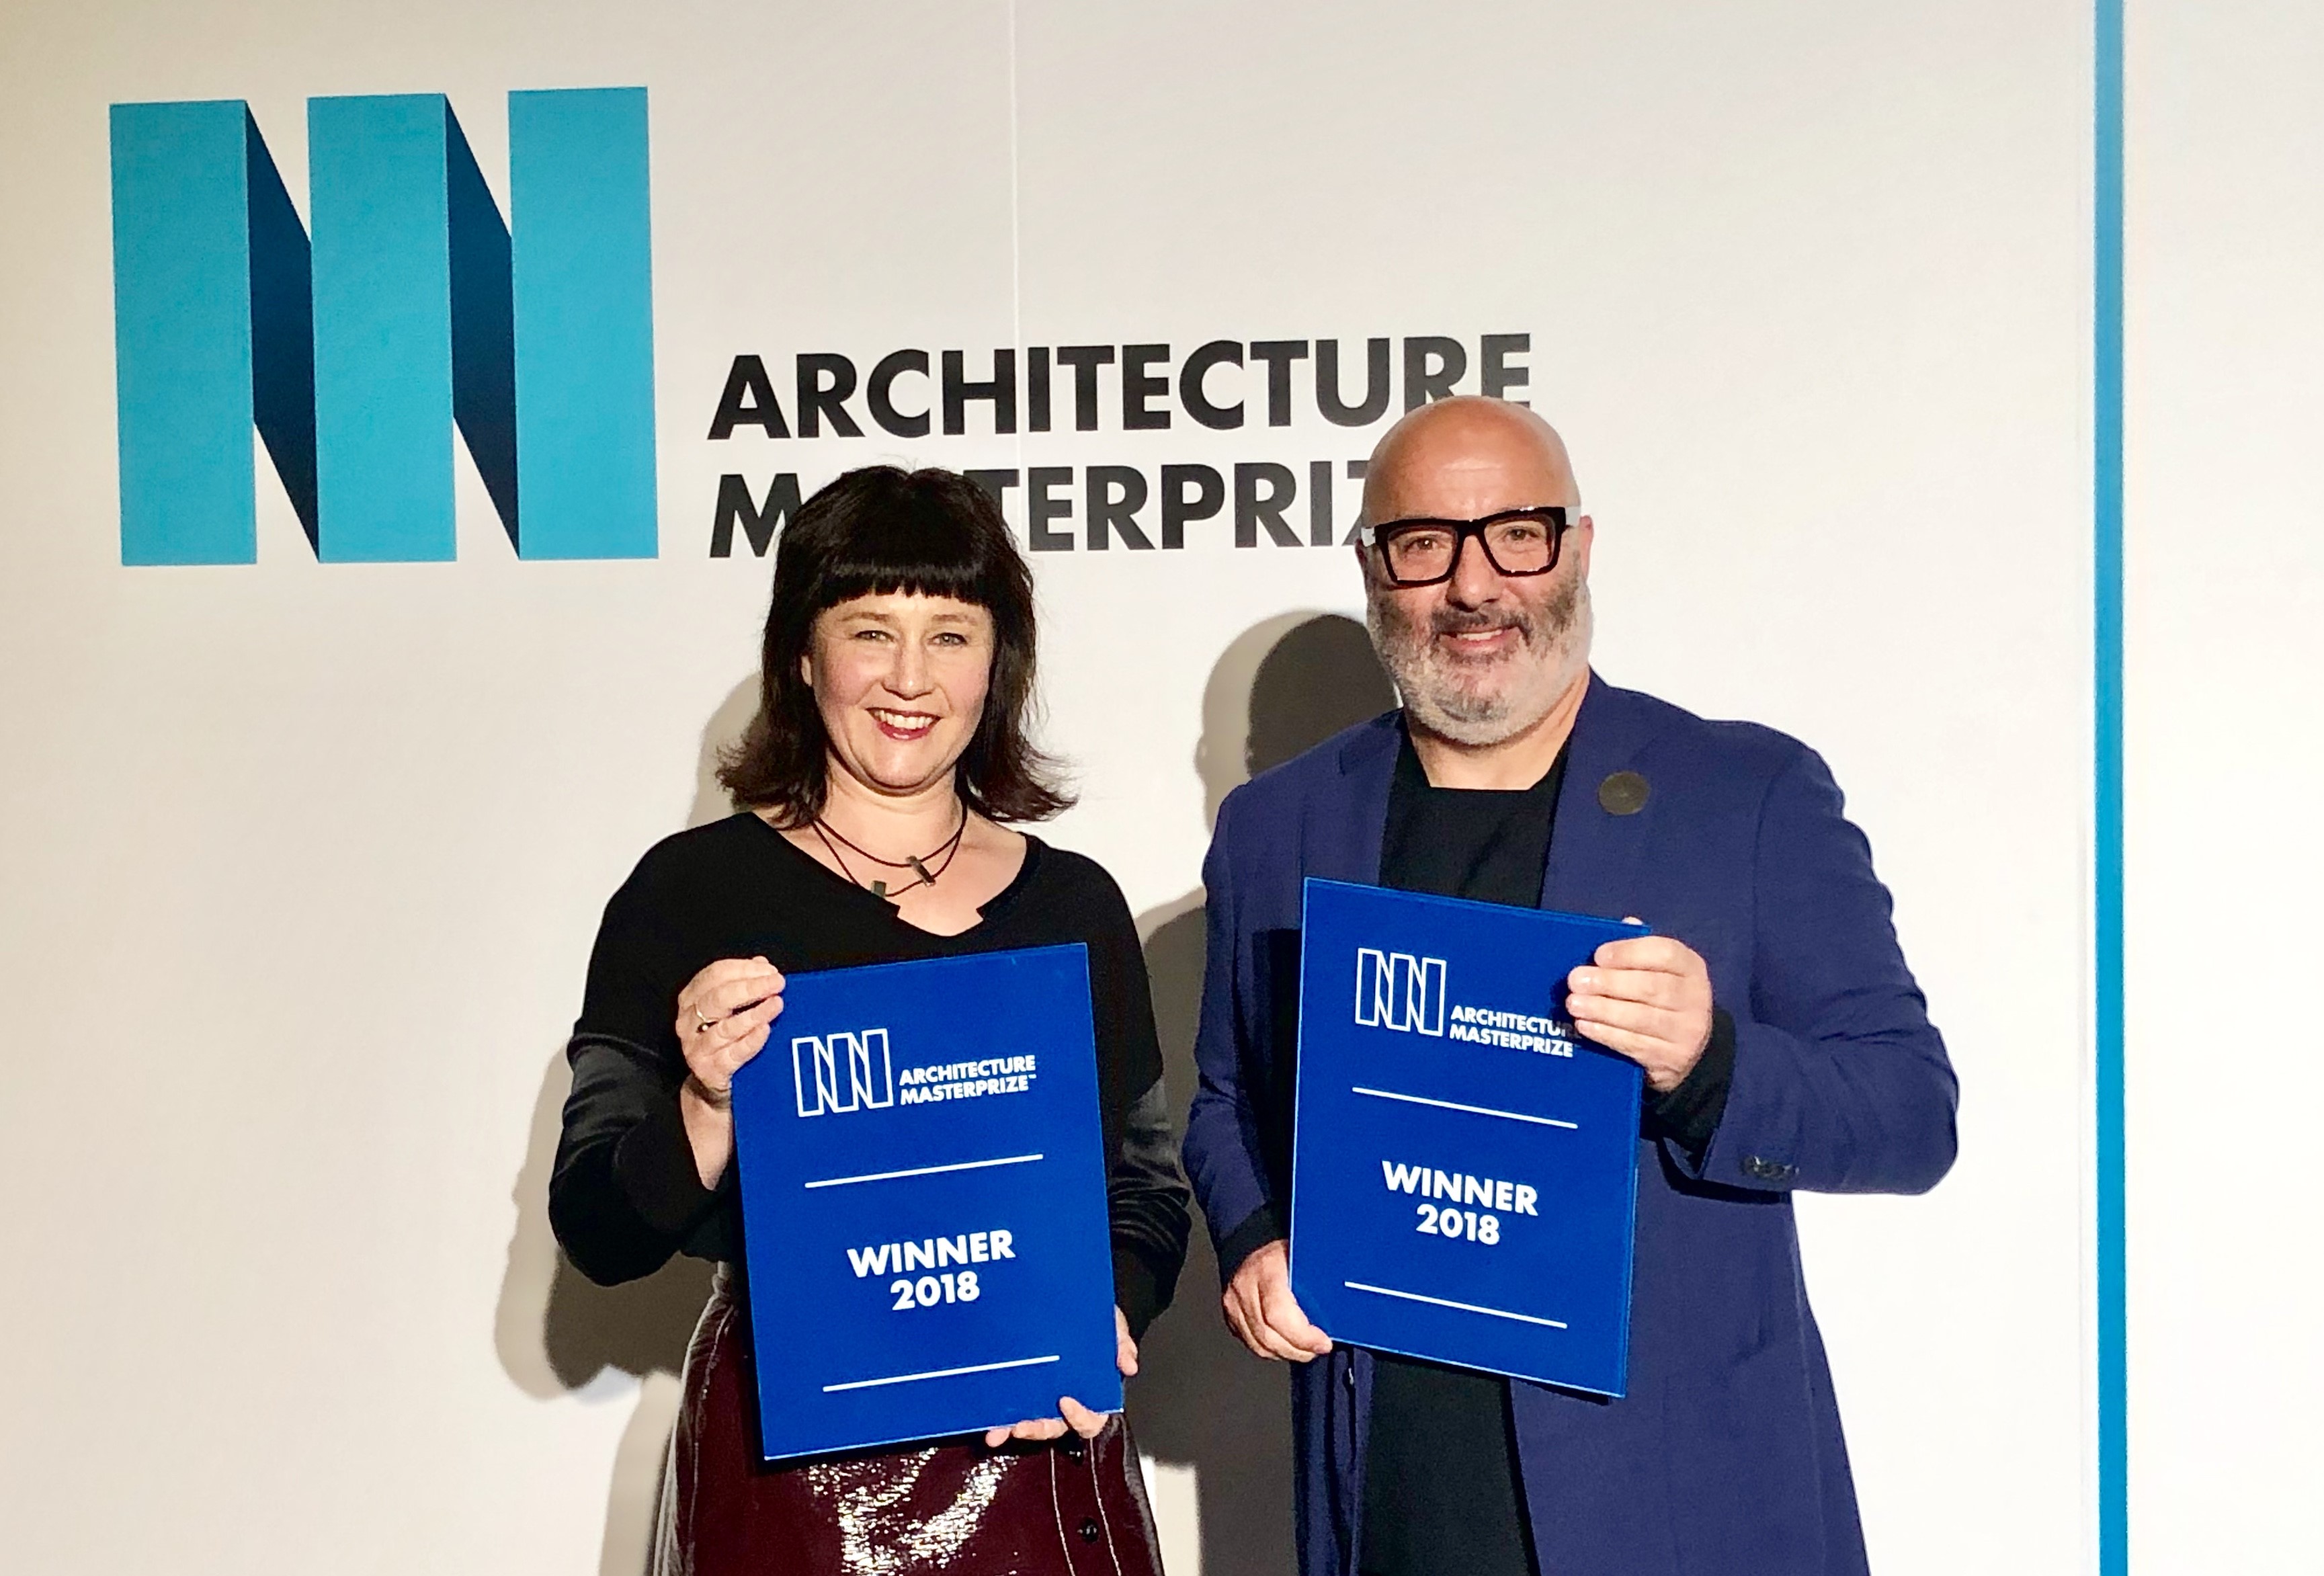 liminal-accept-architecture-master-prize-award-2019